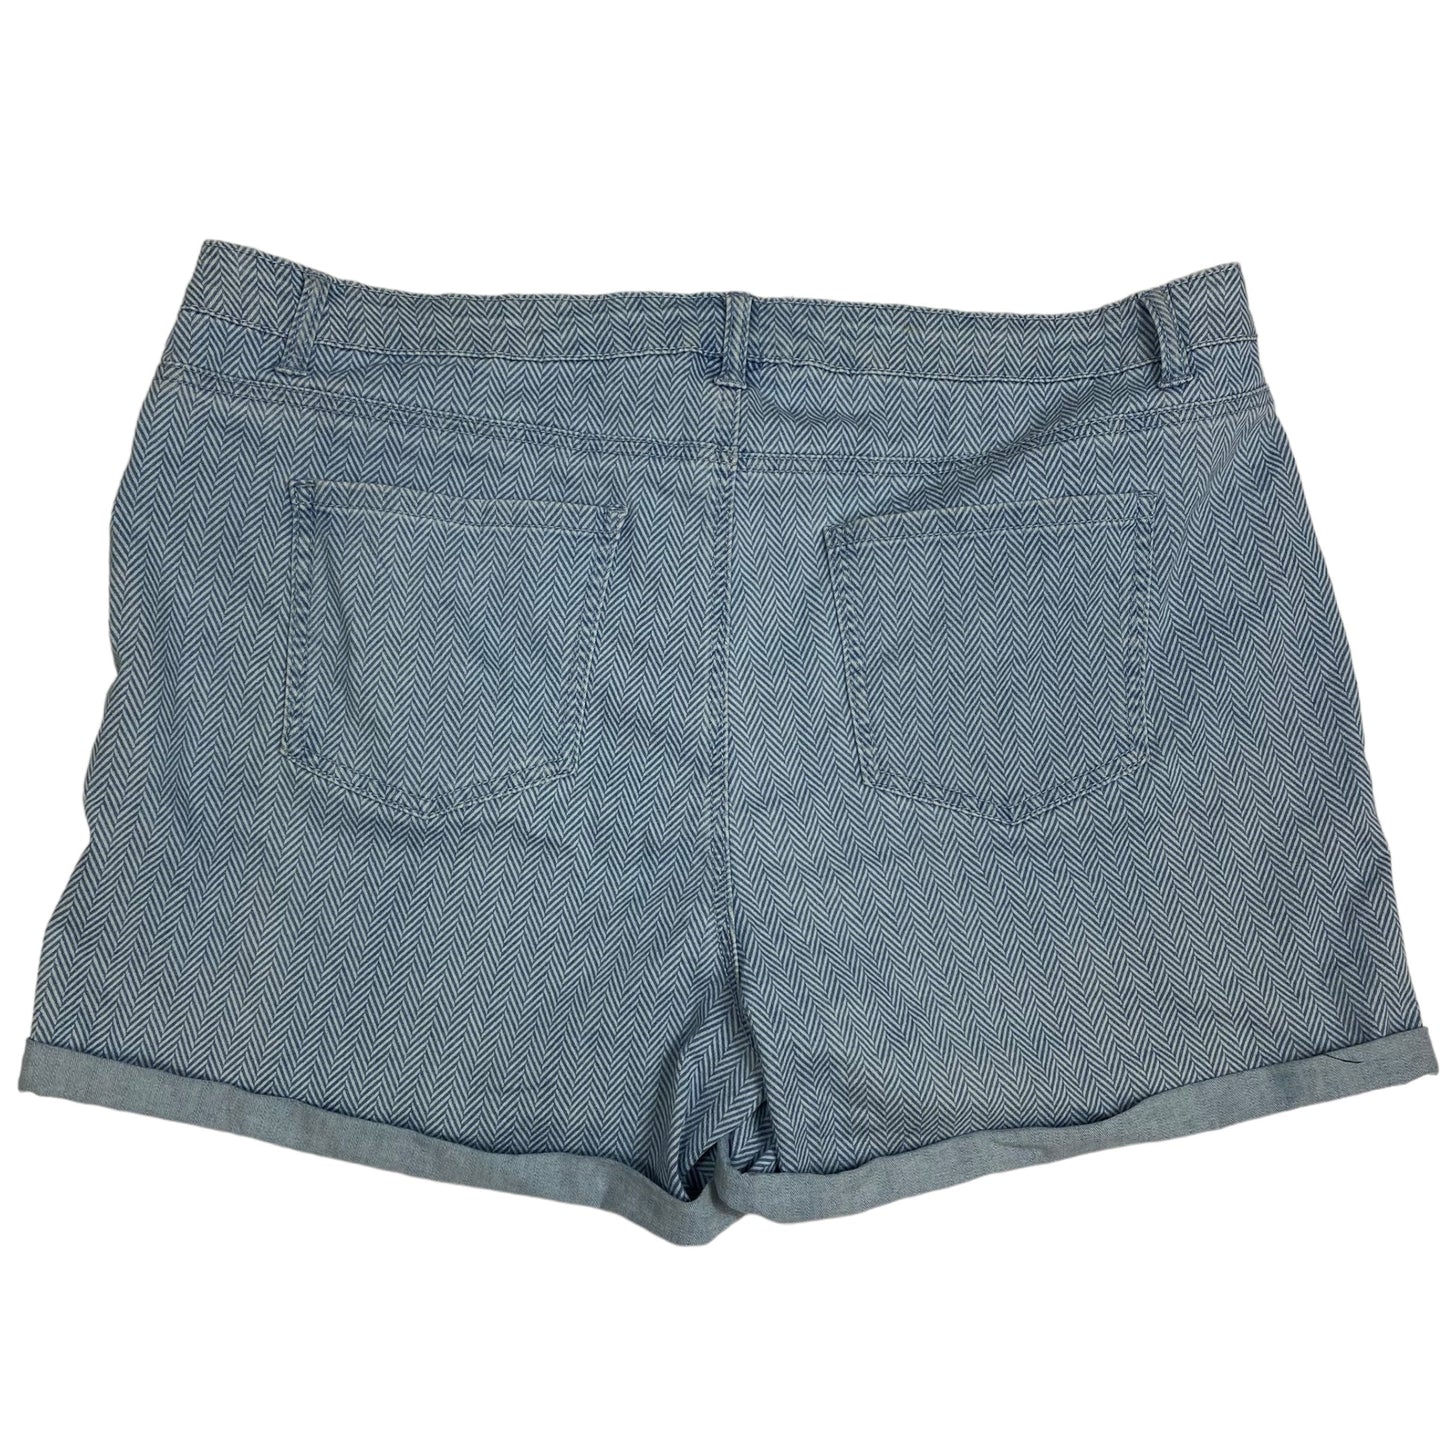 Shorts By Baccini  Size: 22